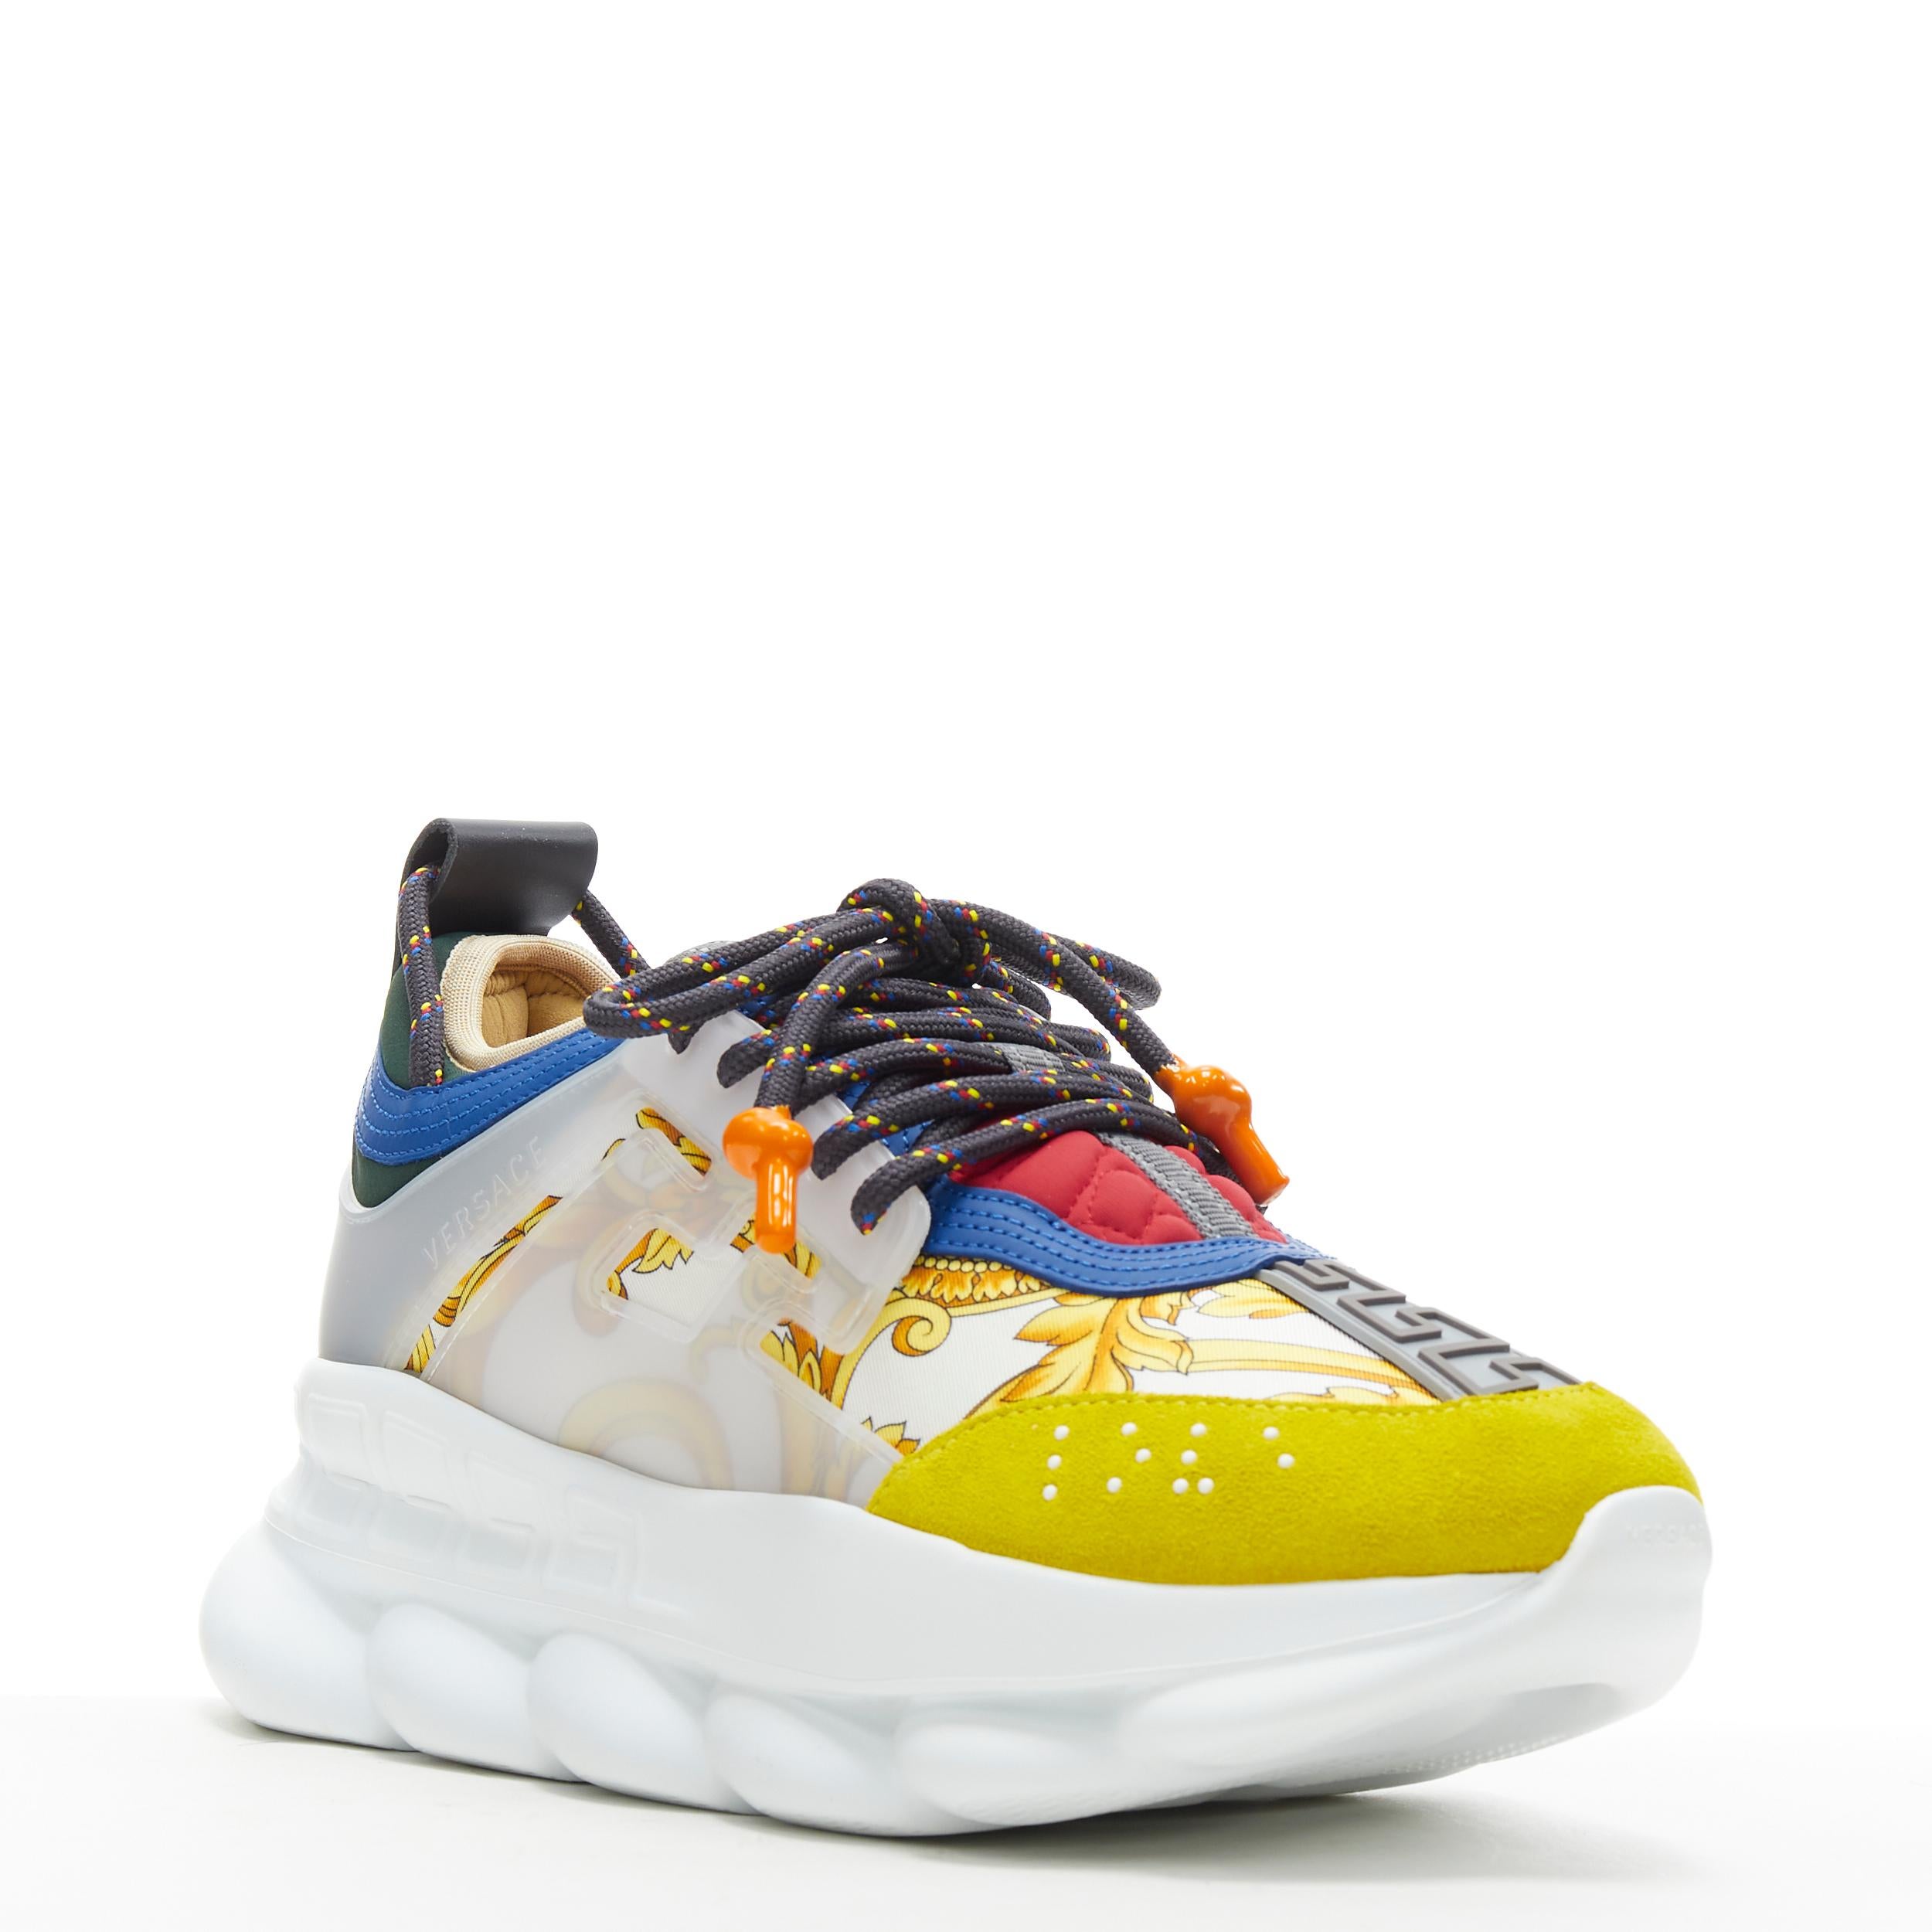 new VERSACE Chain Reaction gold barocco twill yellow blue suede sneaker ...